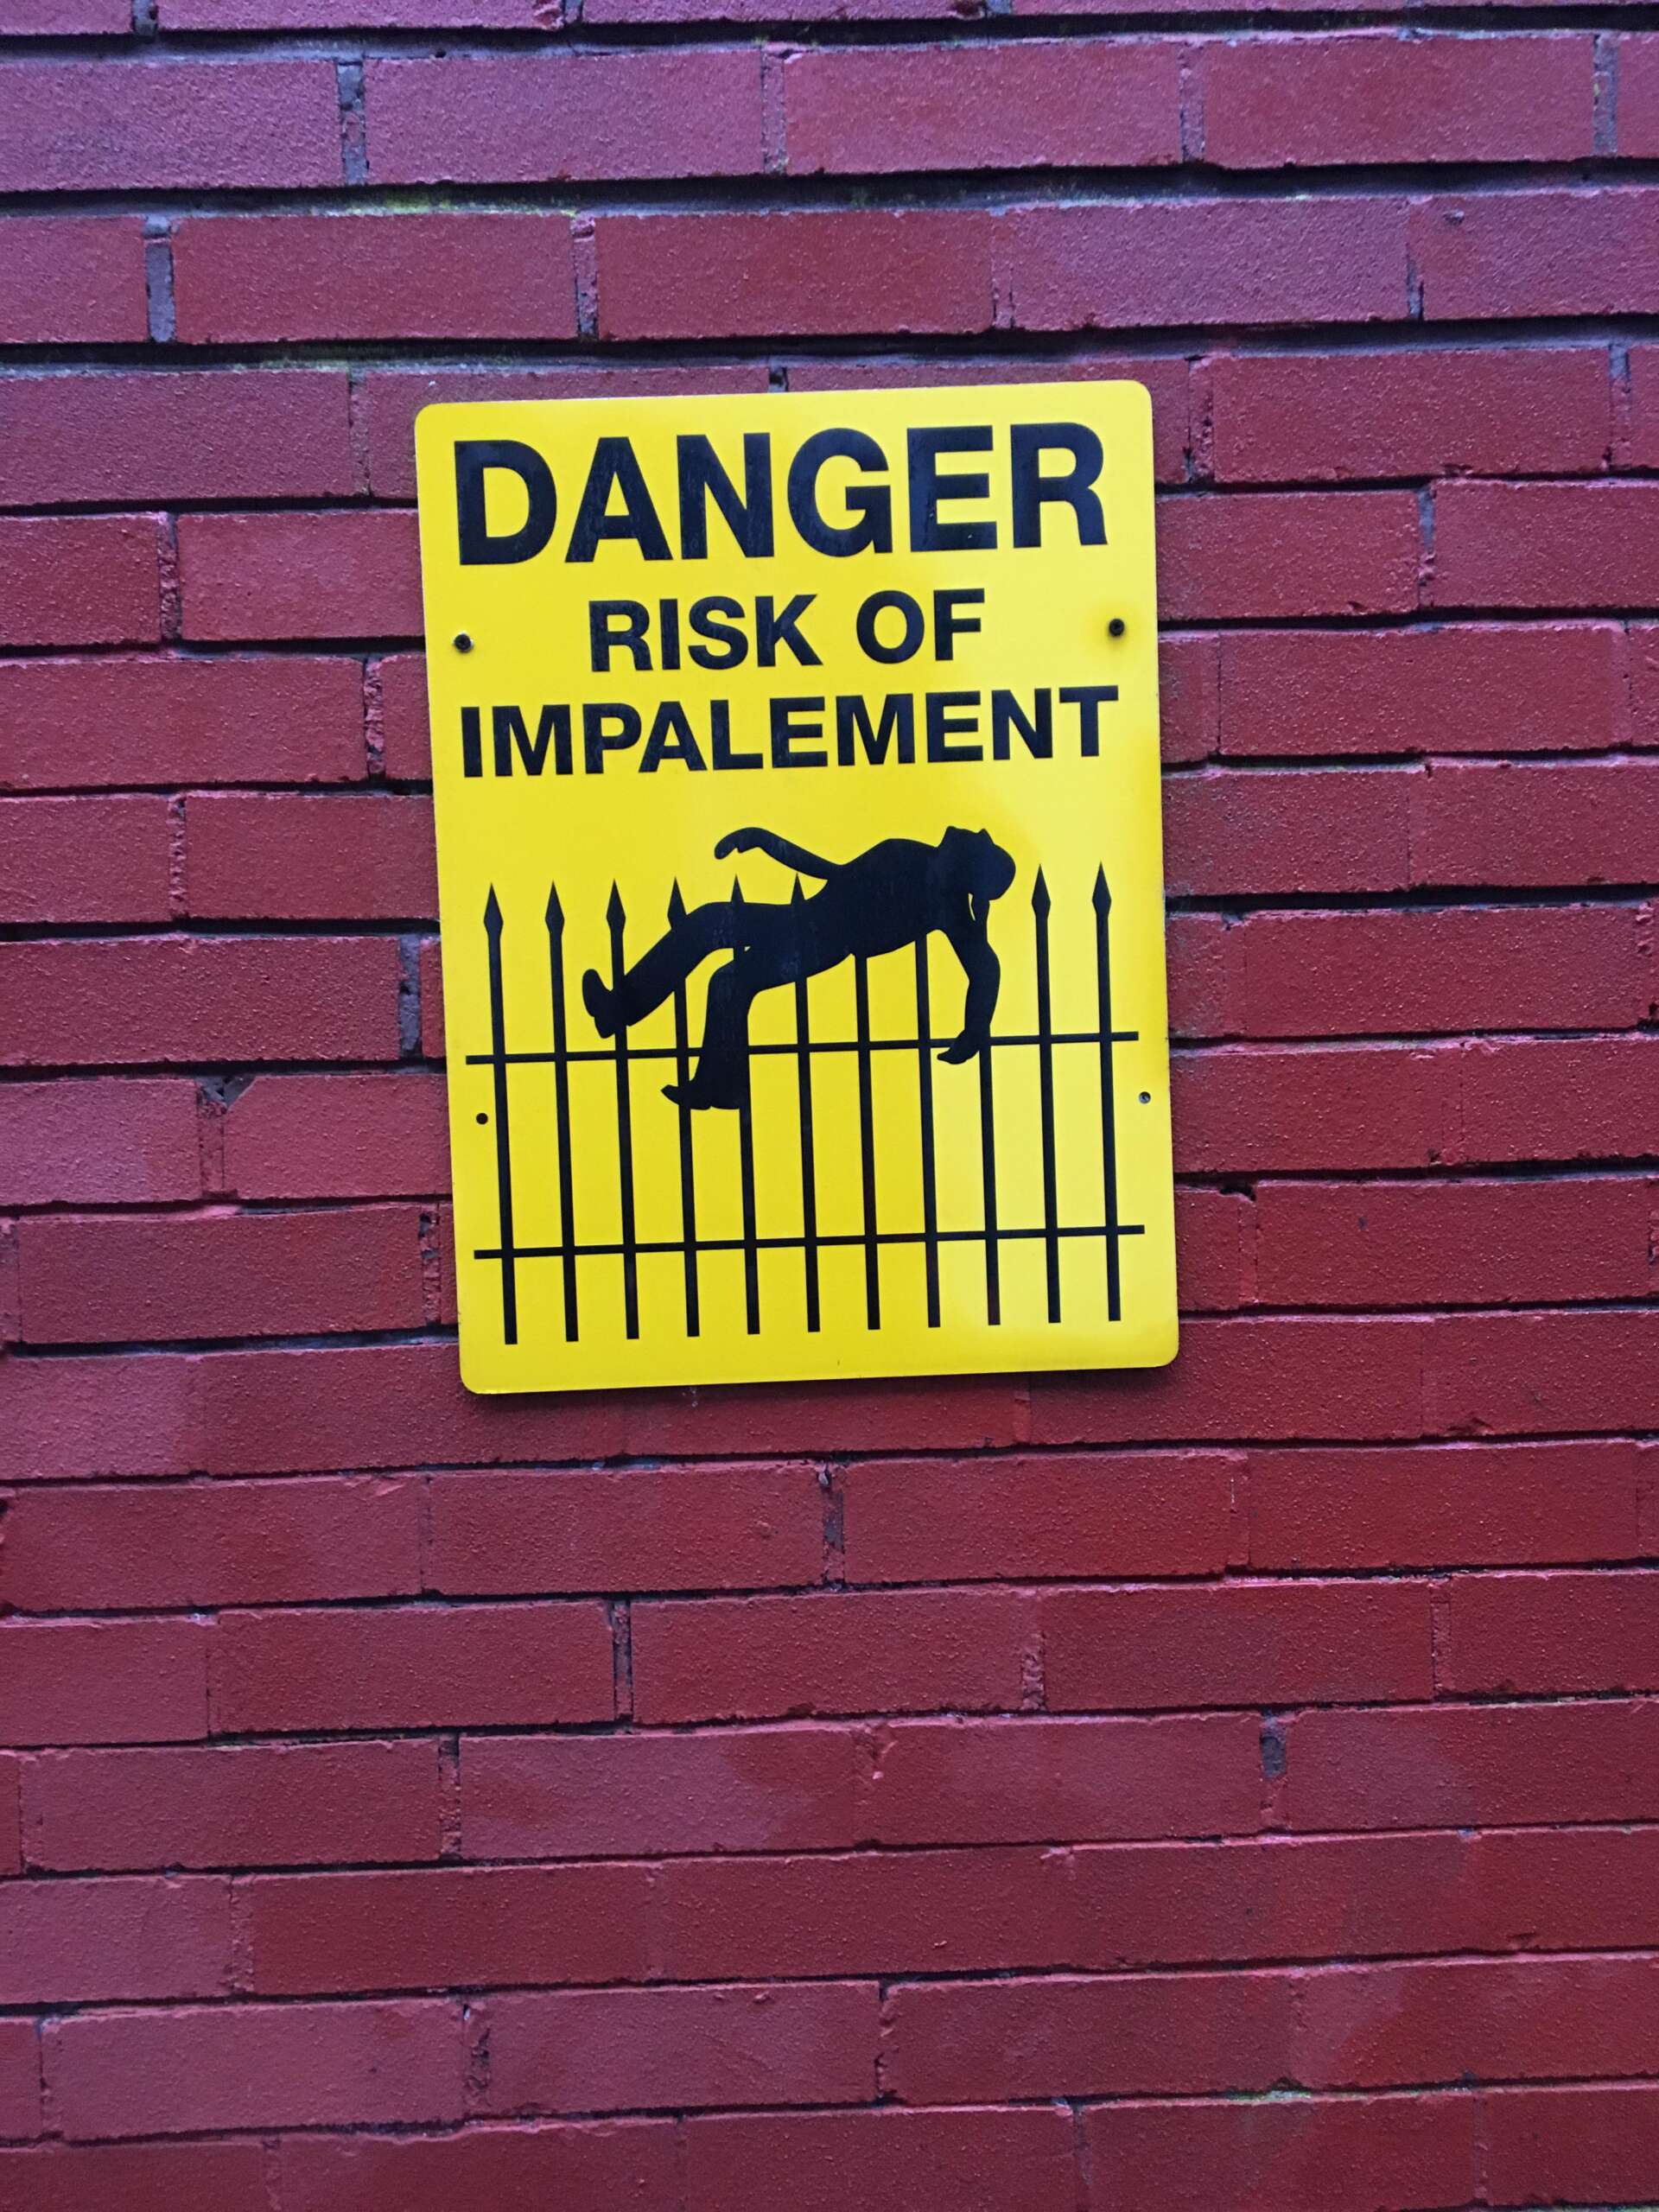 A yellow warning sign with black text that reads "DANGER RISK OF IMPALEMENT" is mounted on a red brick wall. The sign features an illustration of a person being impaled on a spiked fence.